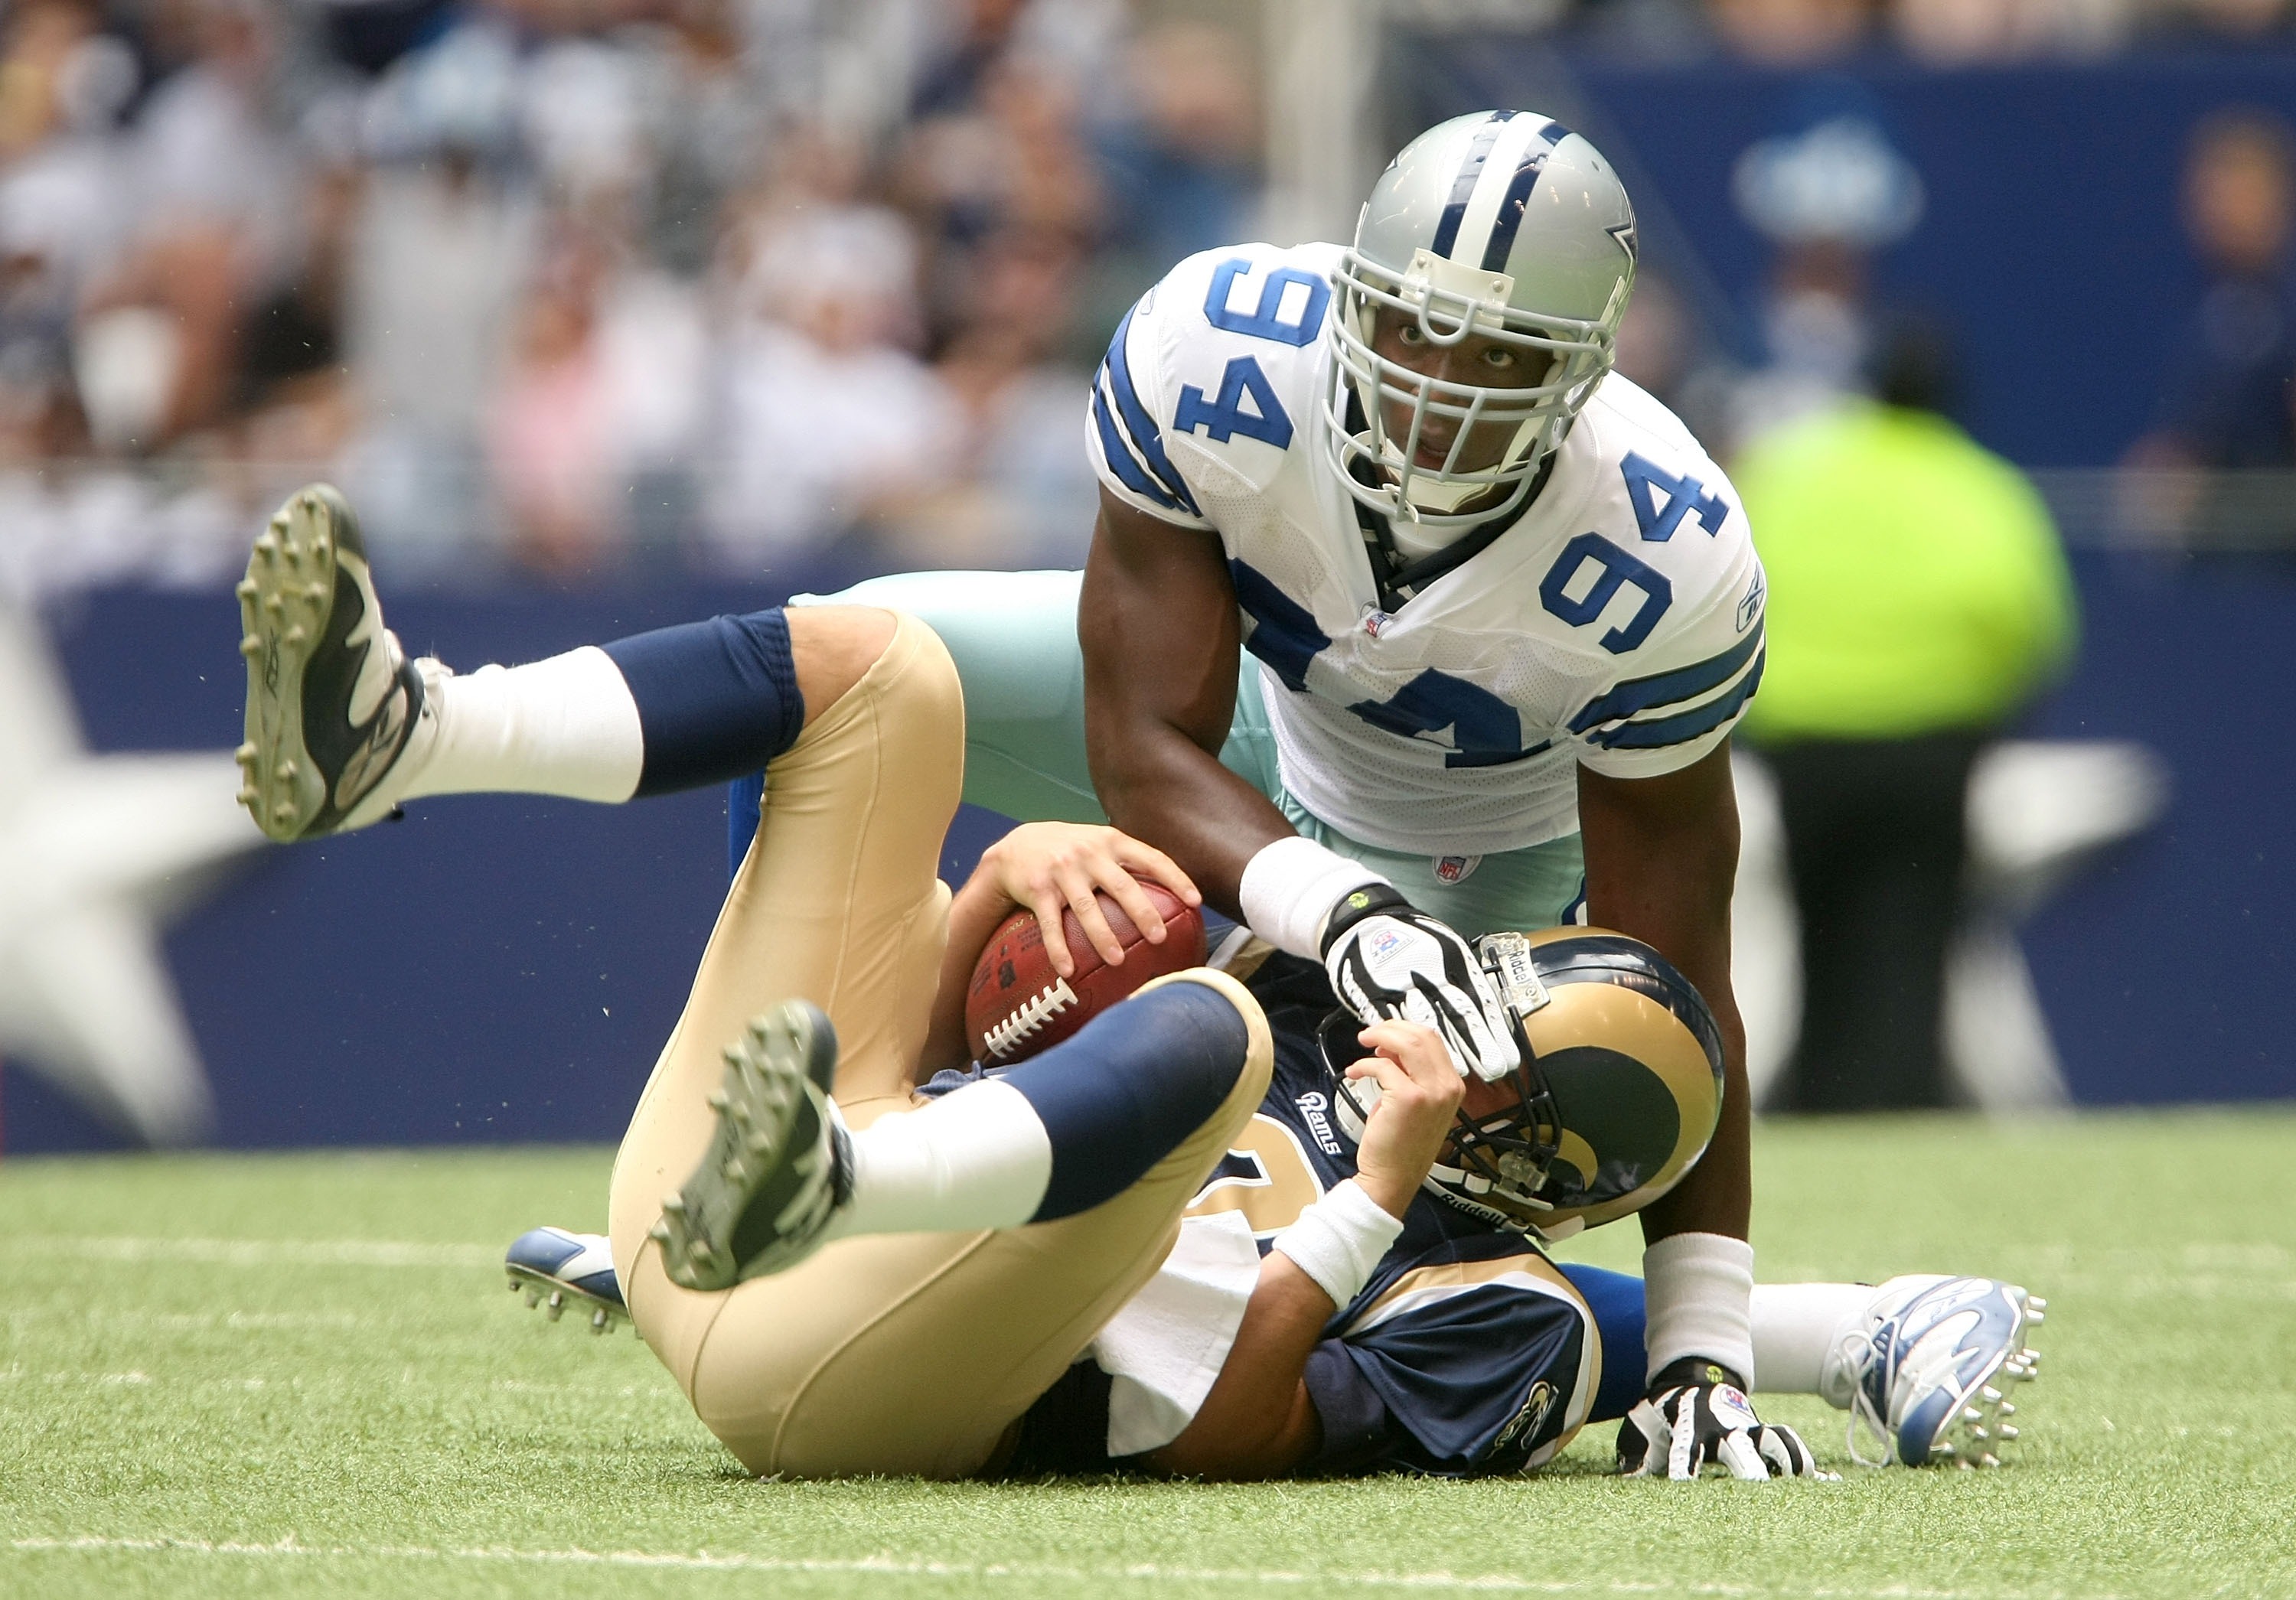 DALLAS - SEPTEMBER 30:  Linebacker DeMarcus Ware #94 of the Dallas Cowboys sacks quarterback Marc Bulger #10 of the St. Louis Rams at Texas Stadium September 30, 2007 in Irving, Texas. The Cowboys won 35-7.  (Photo by Stephen Dunn/Getty Images)